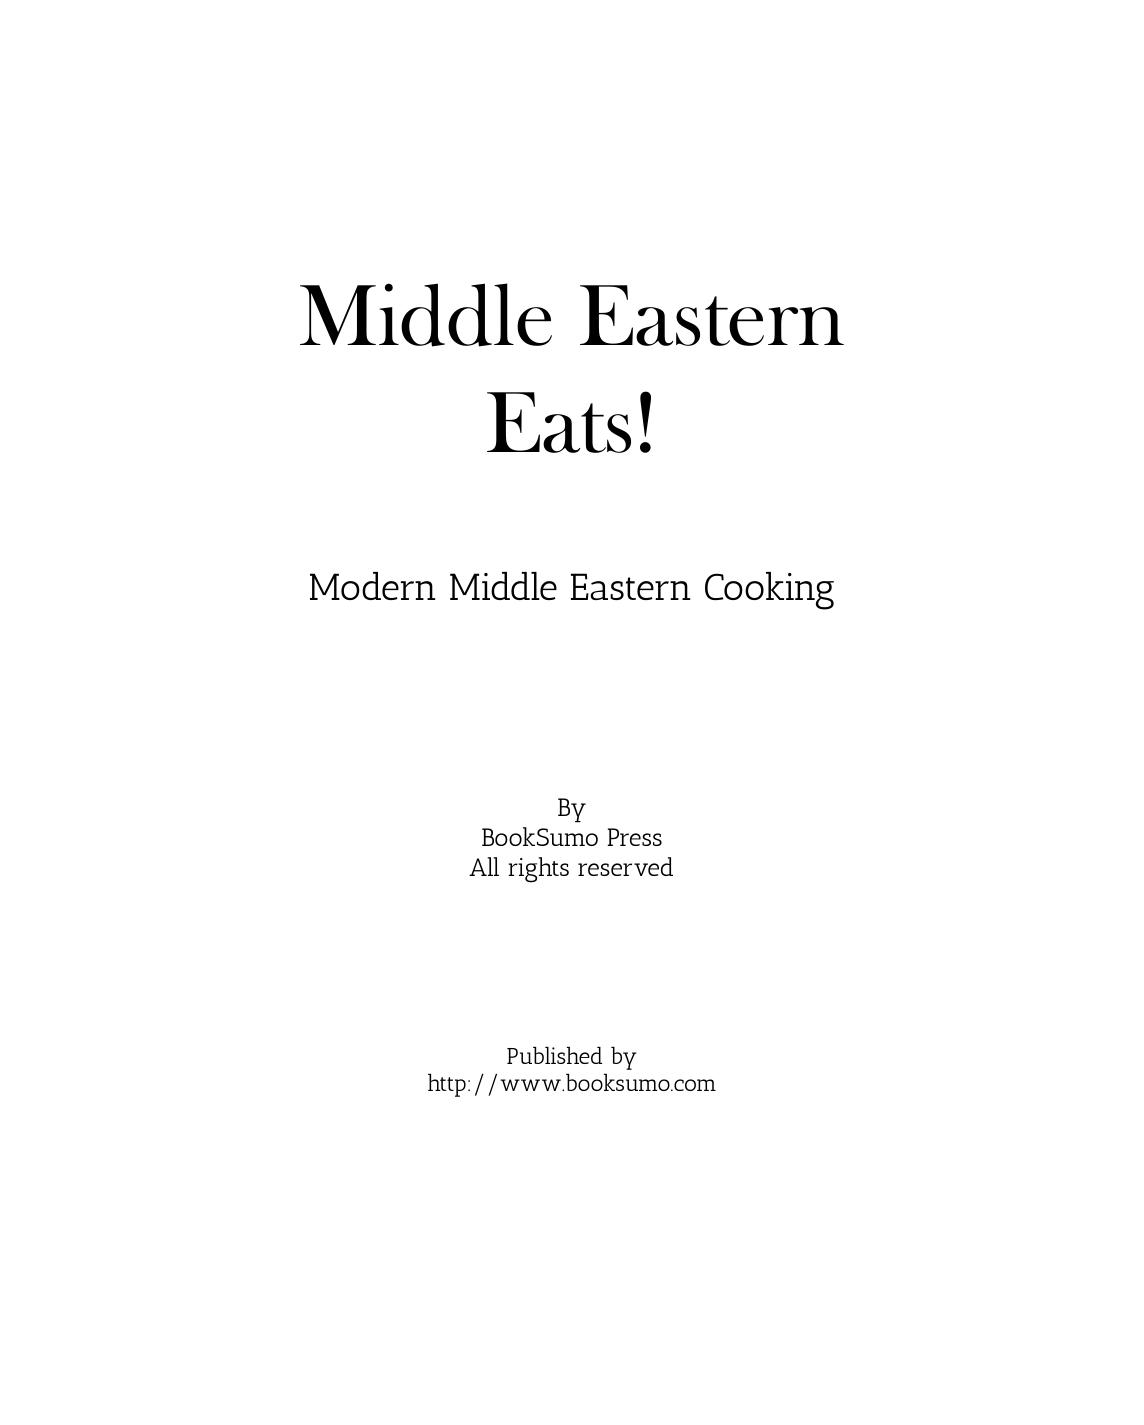 Middle Eastern Eats!: Modern Middle Eastern Cooking by BookSumo Press